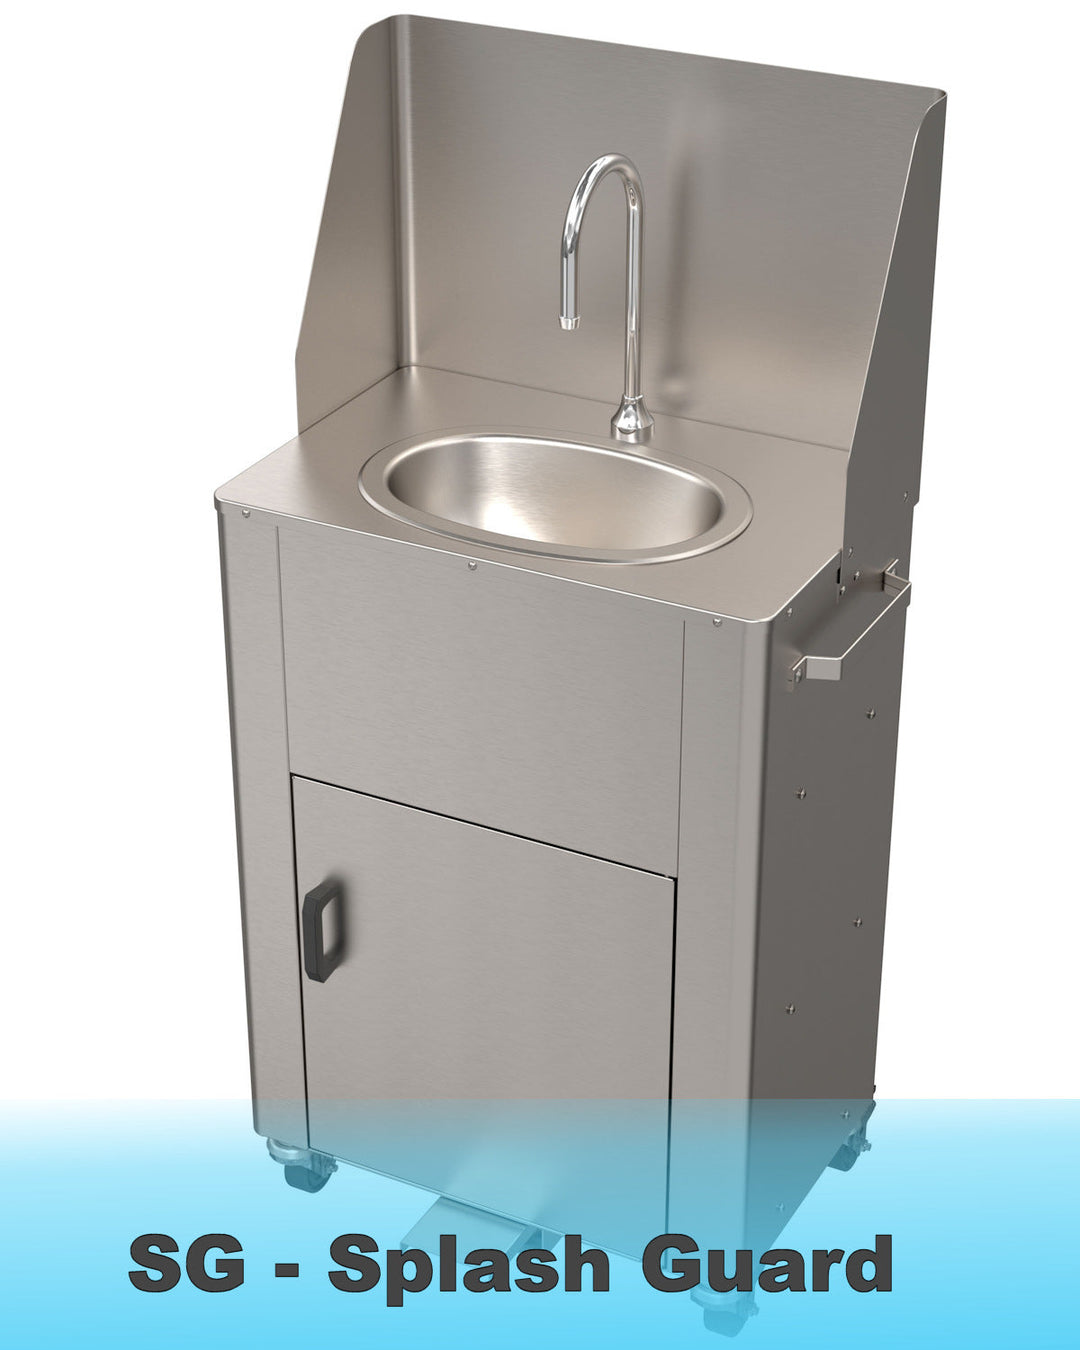 PS1030 On-Demand Pump Portable Sink